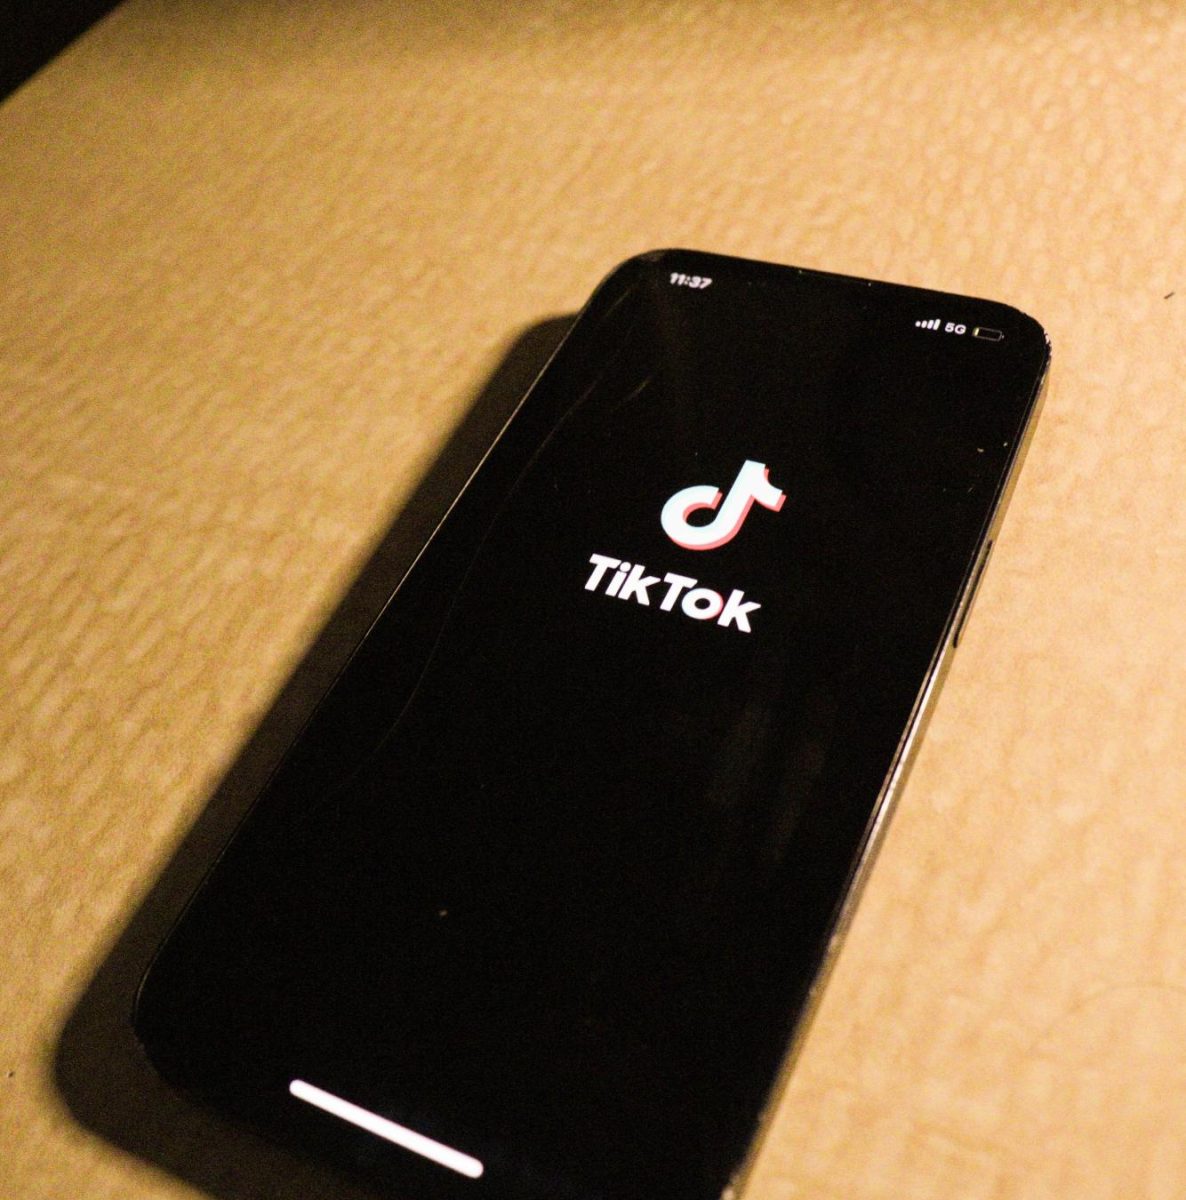 TikTok loading on a cell phone